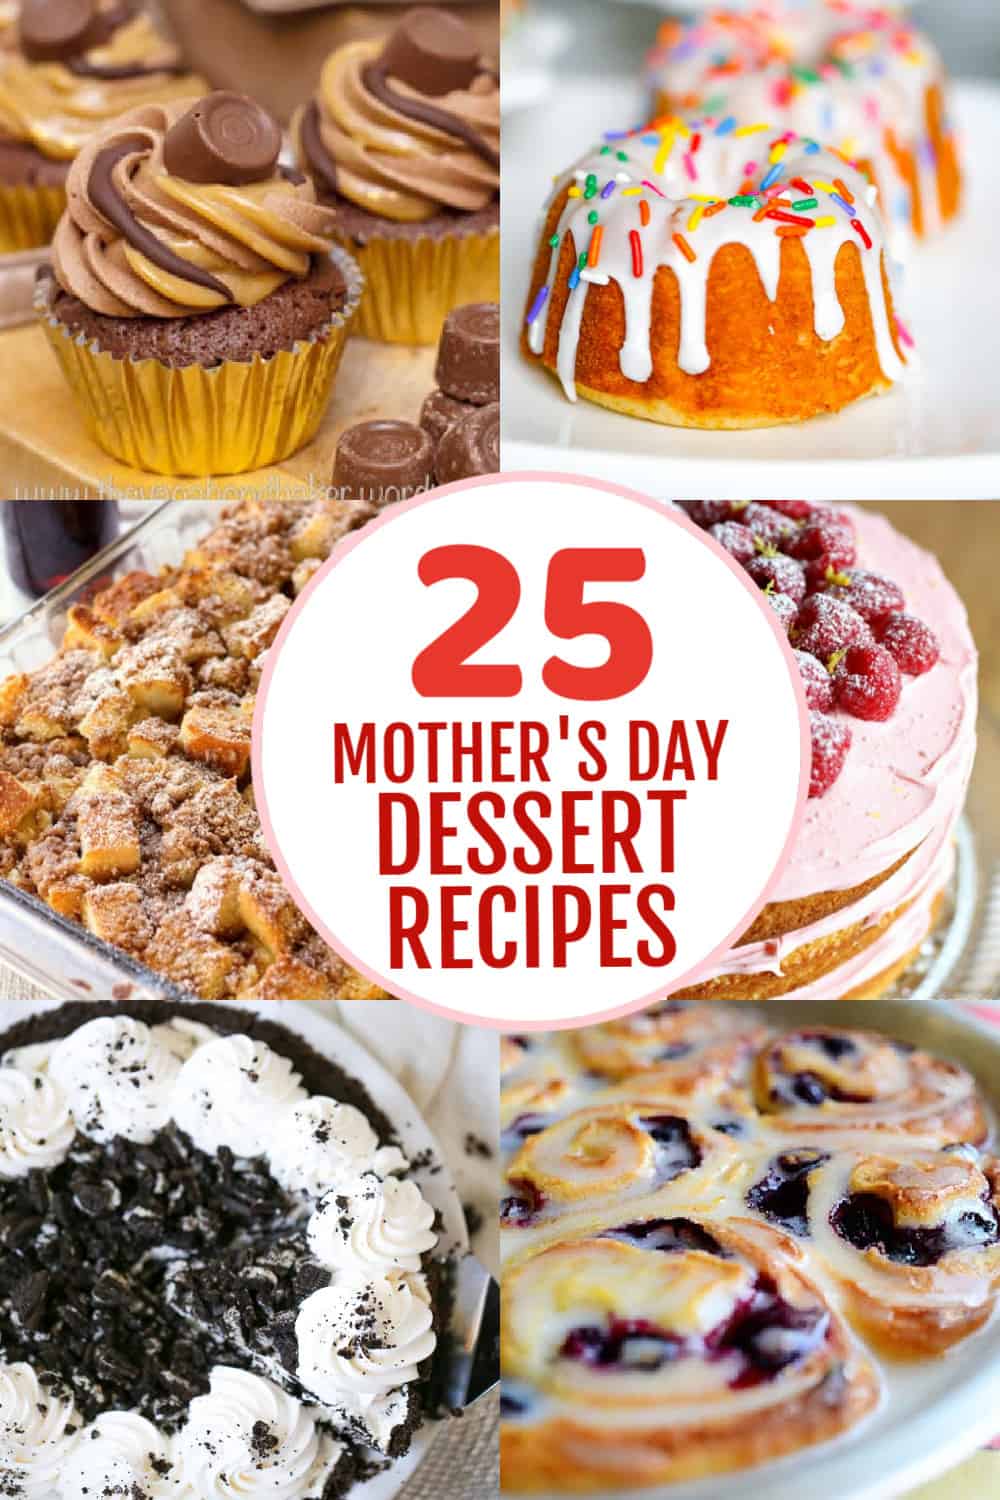 Mother's Day Desserts